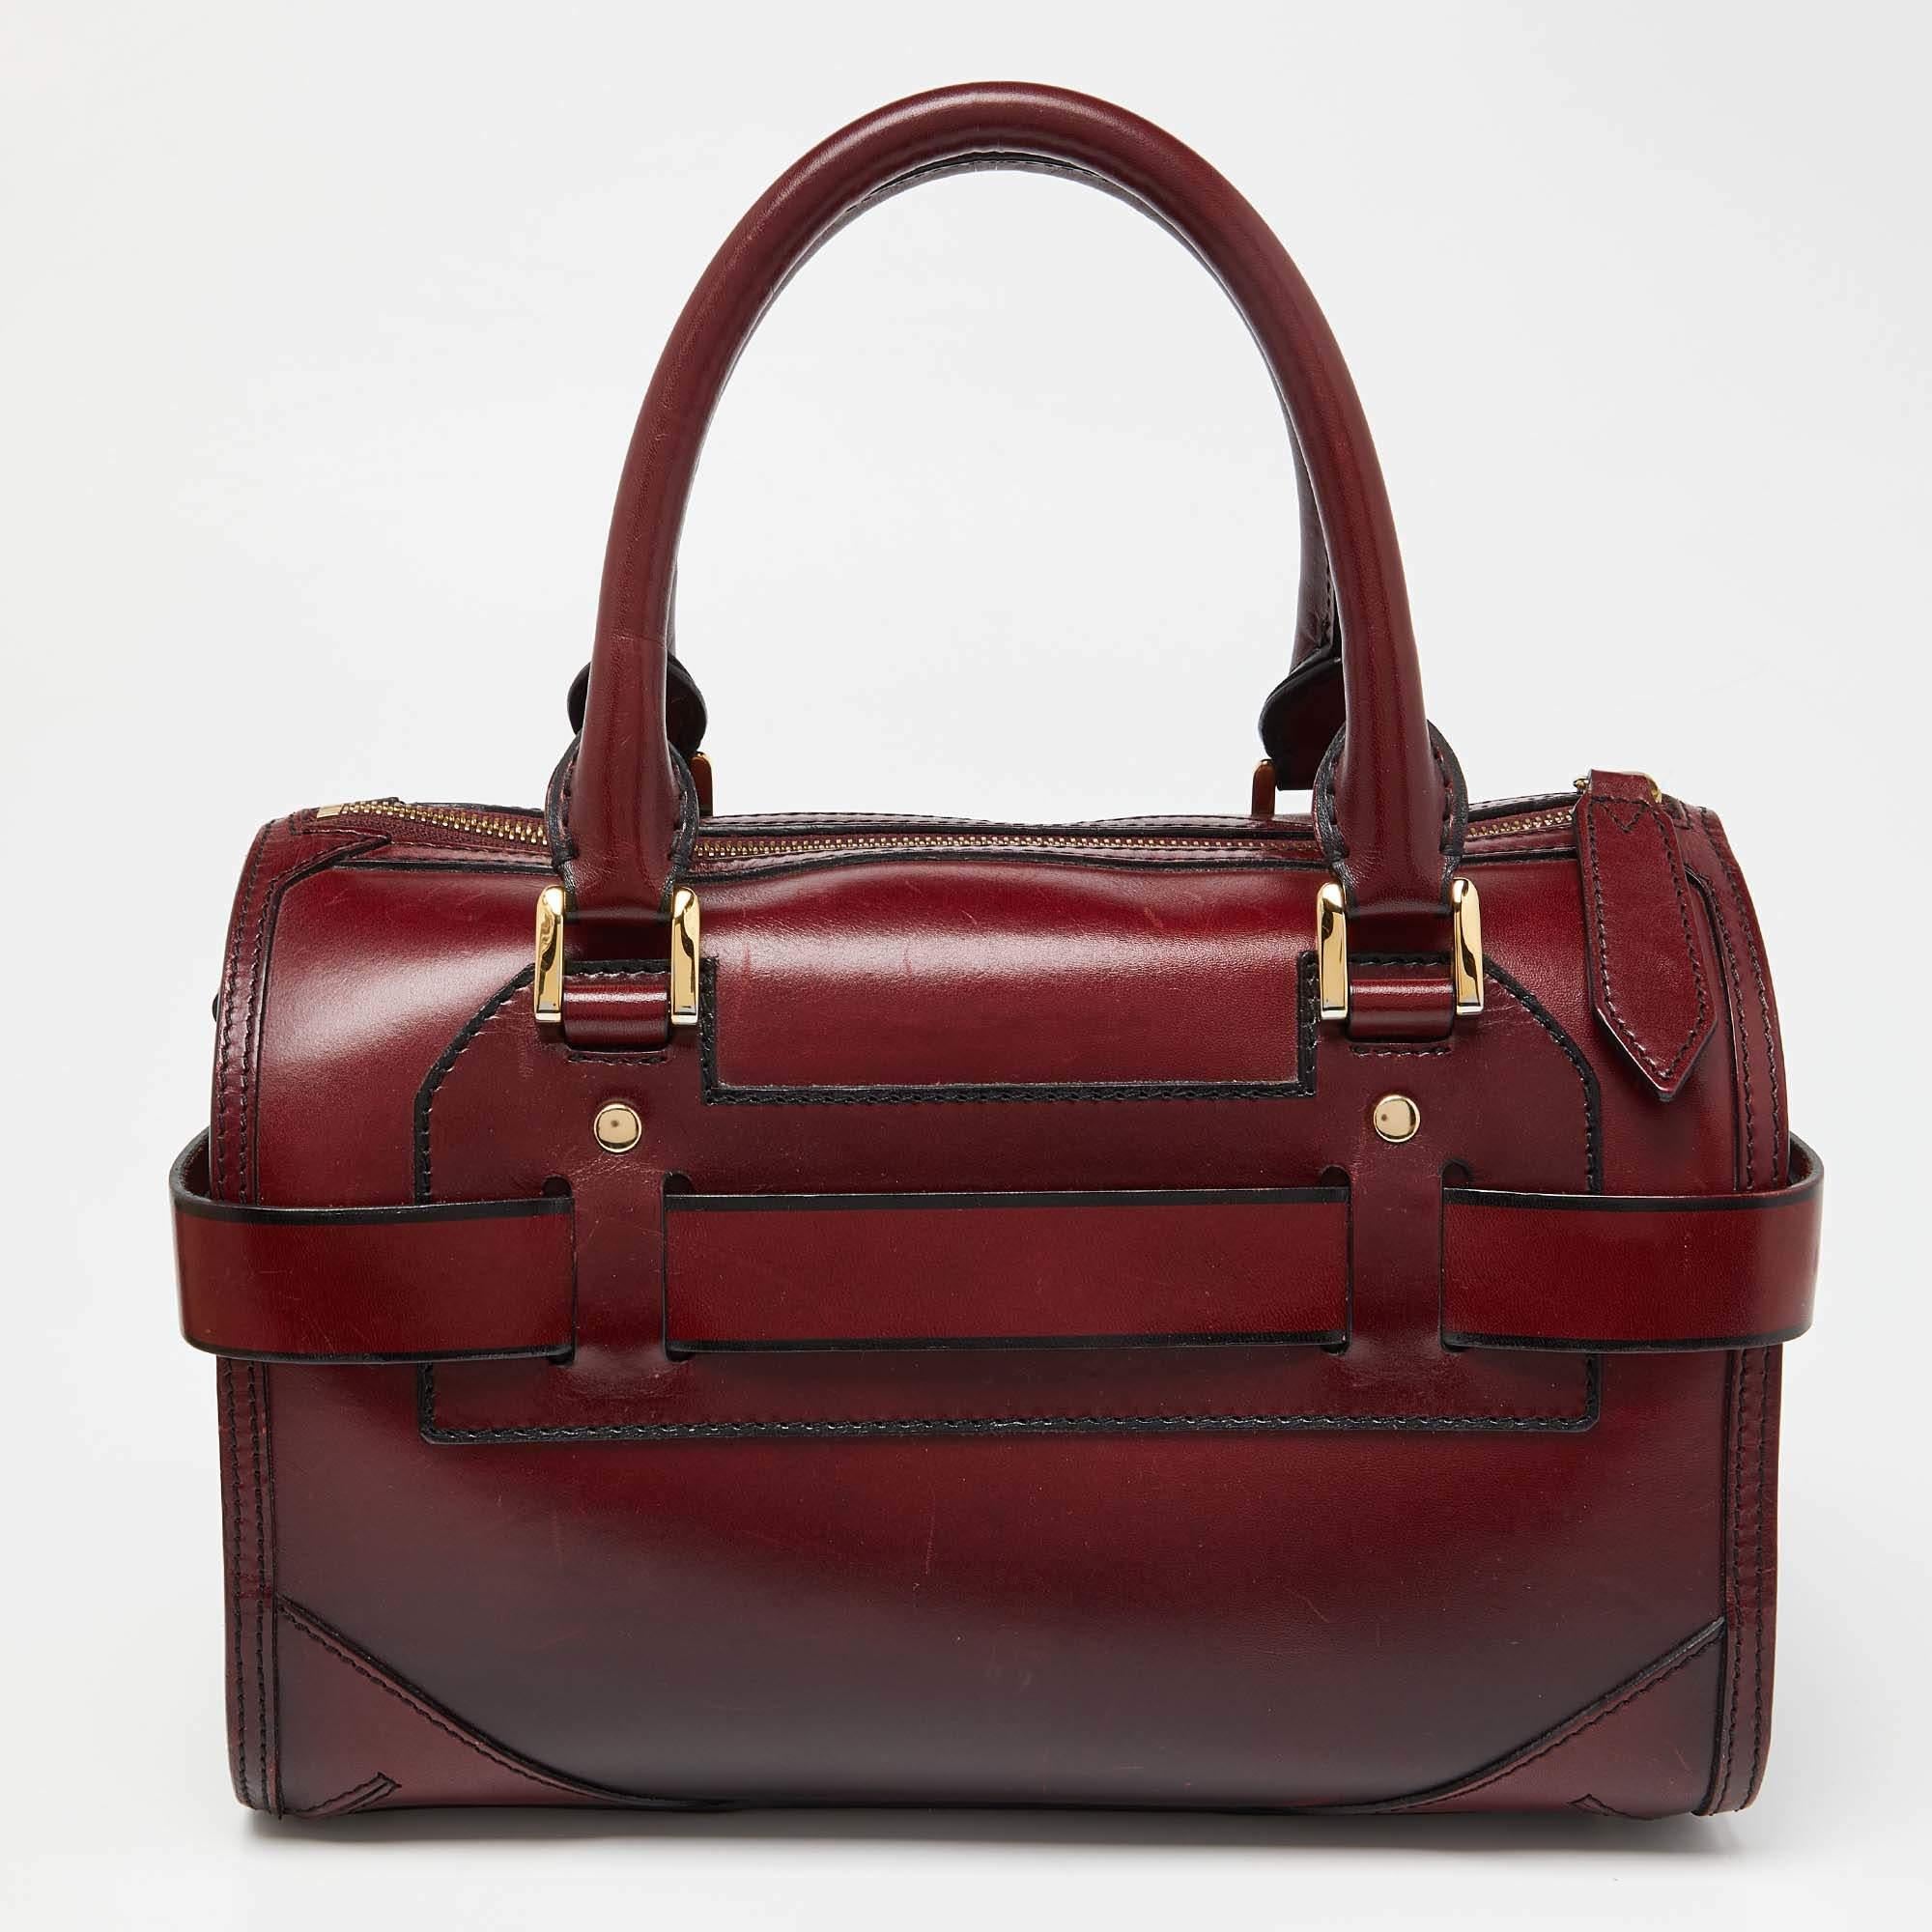 This Burberry bowler bag is a perfect everyday bag that can accommodate all your daily essentials. Crafted from burgundy leather, it is accented with gold-tone hardware. It features a logo plaque, two top handles, a shoulder strap, and a triple